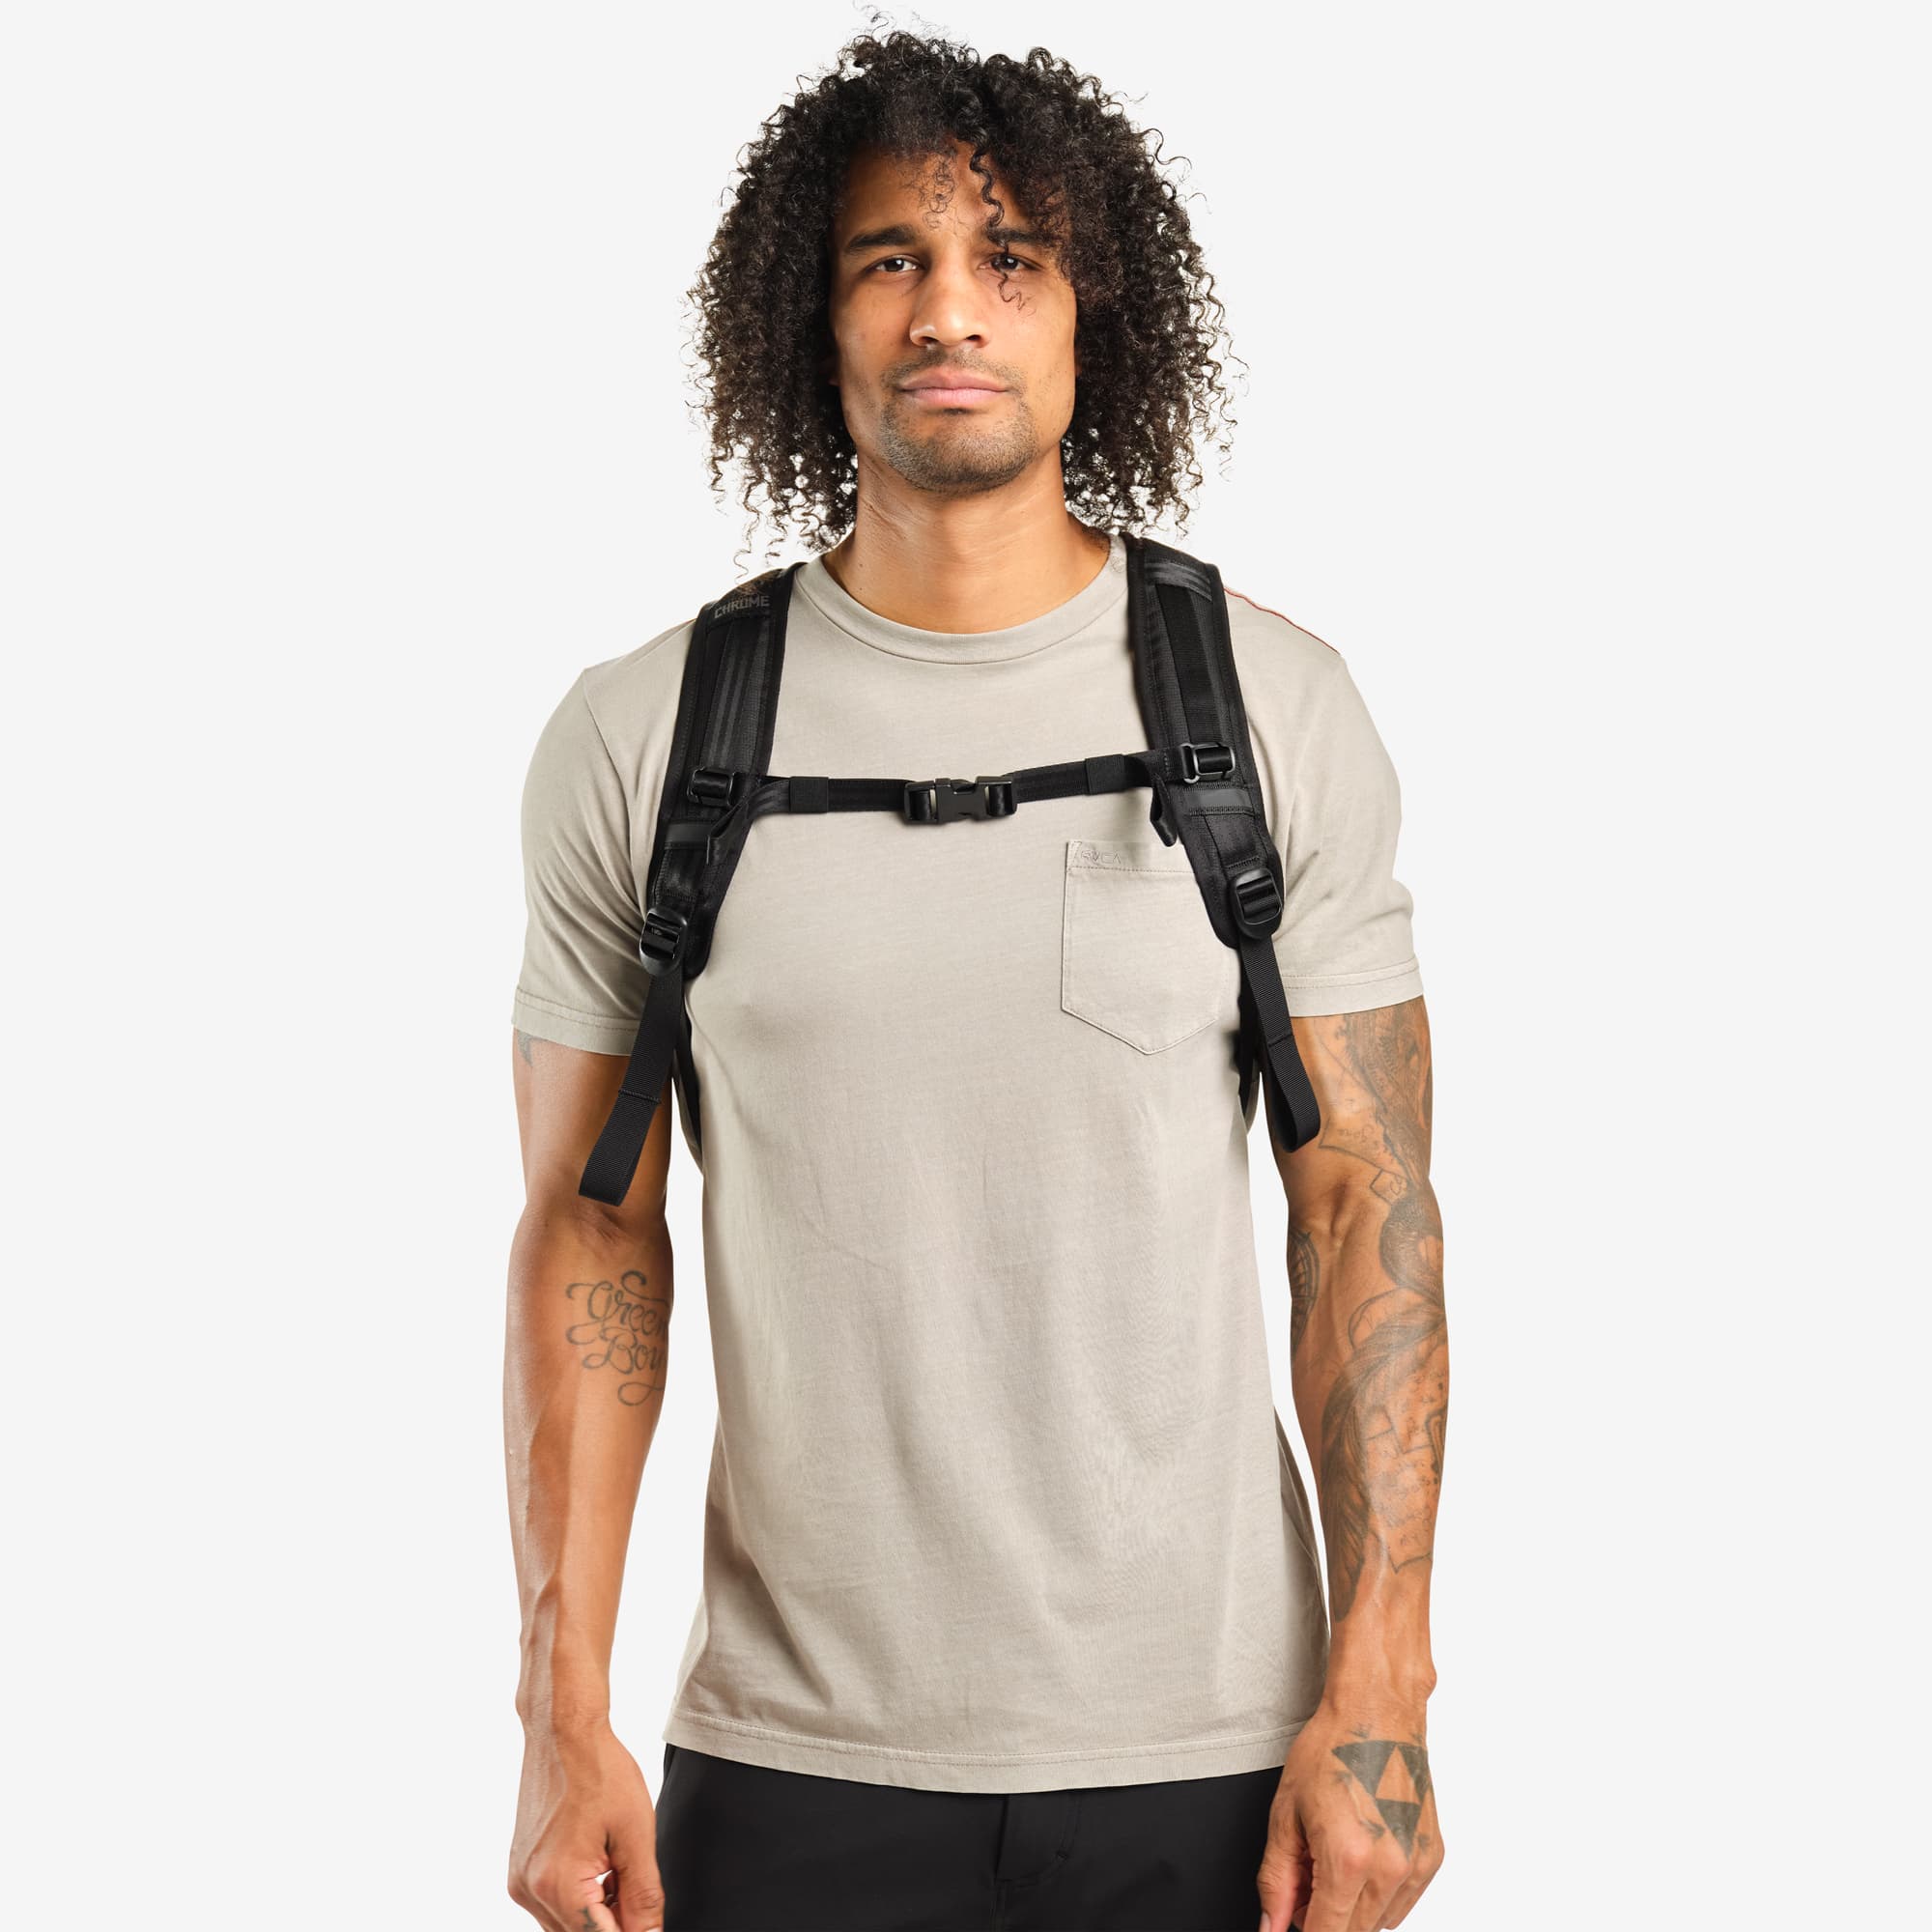 Ruckas 23L Backpack in black worn by a man front view #color_black